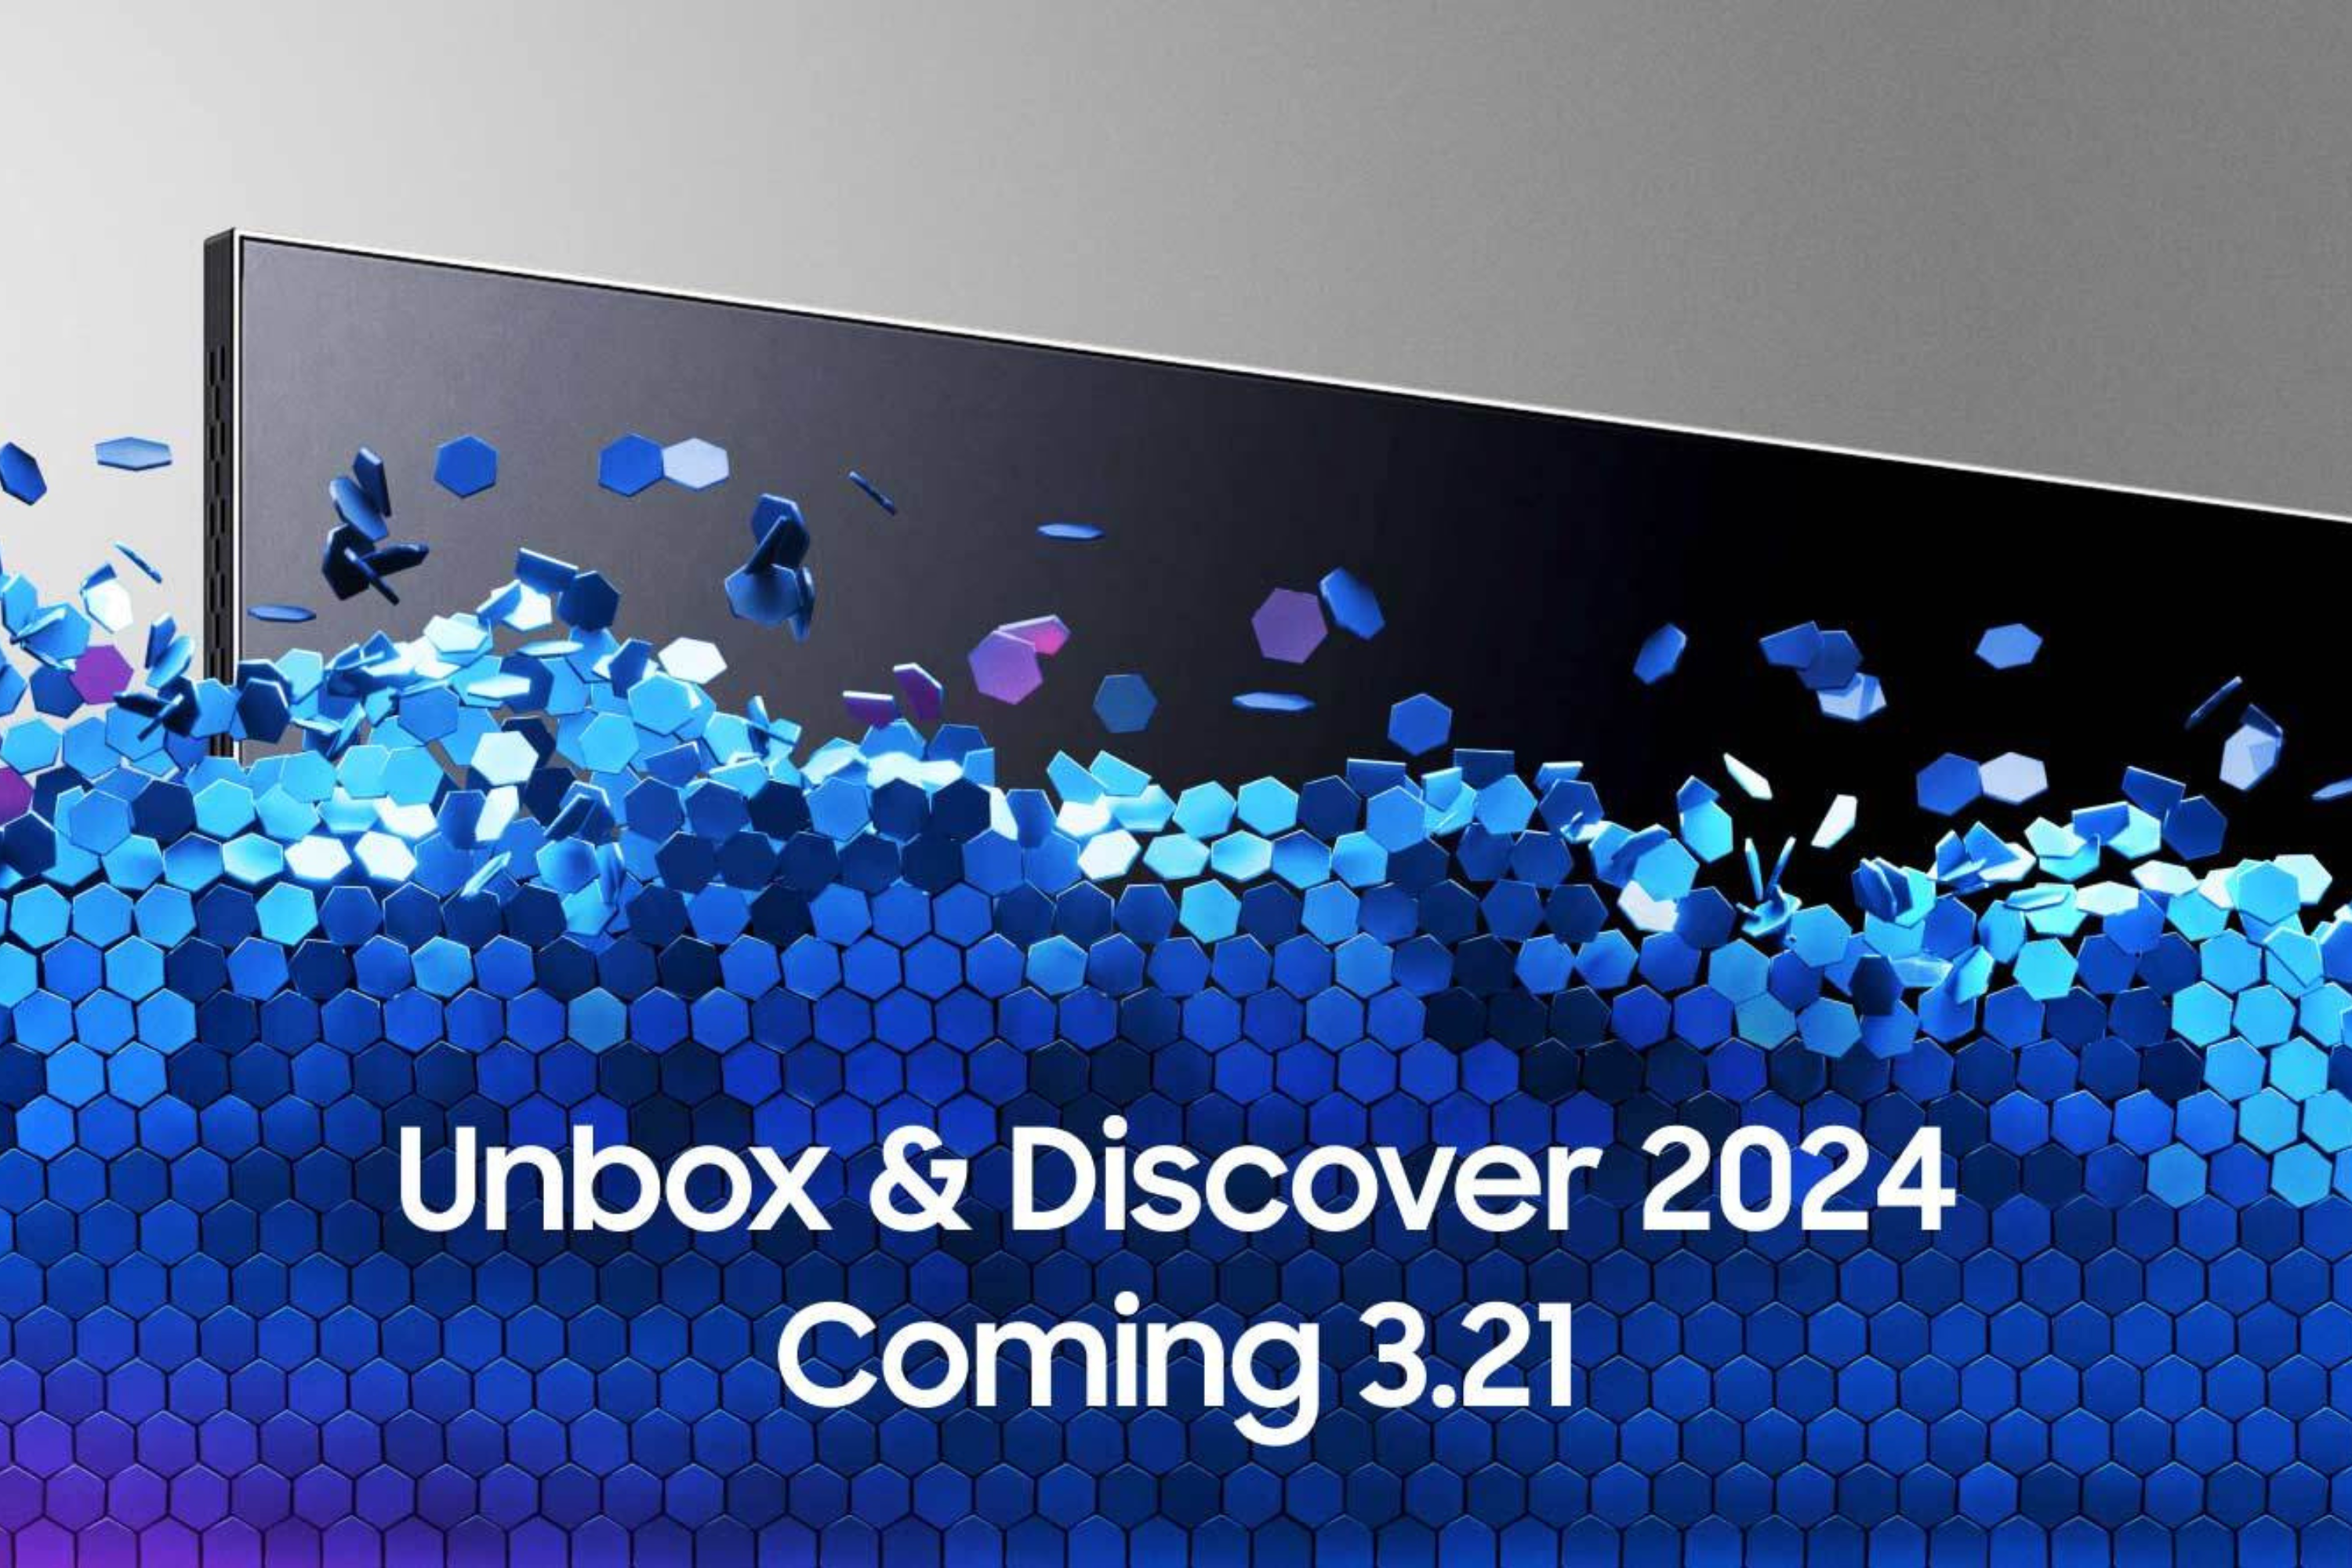 samsung unbox and discover event with a TV pixelating